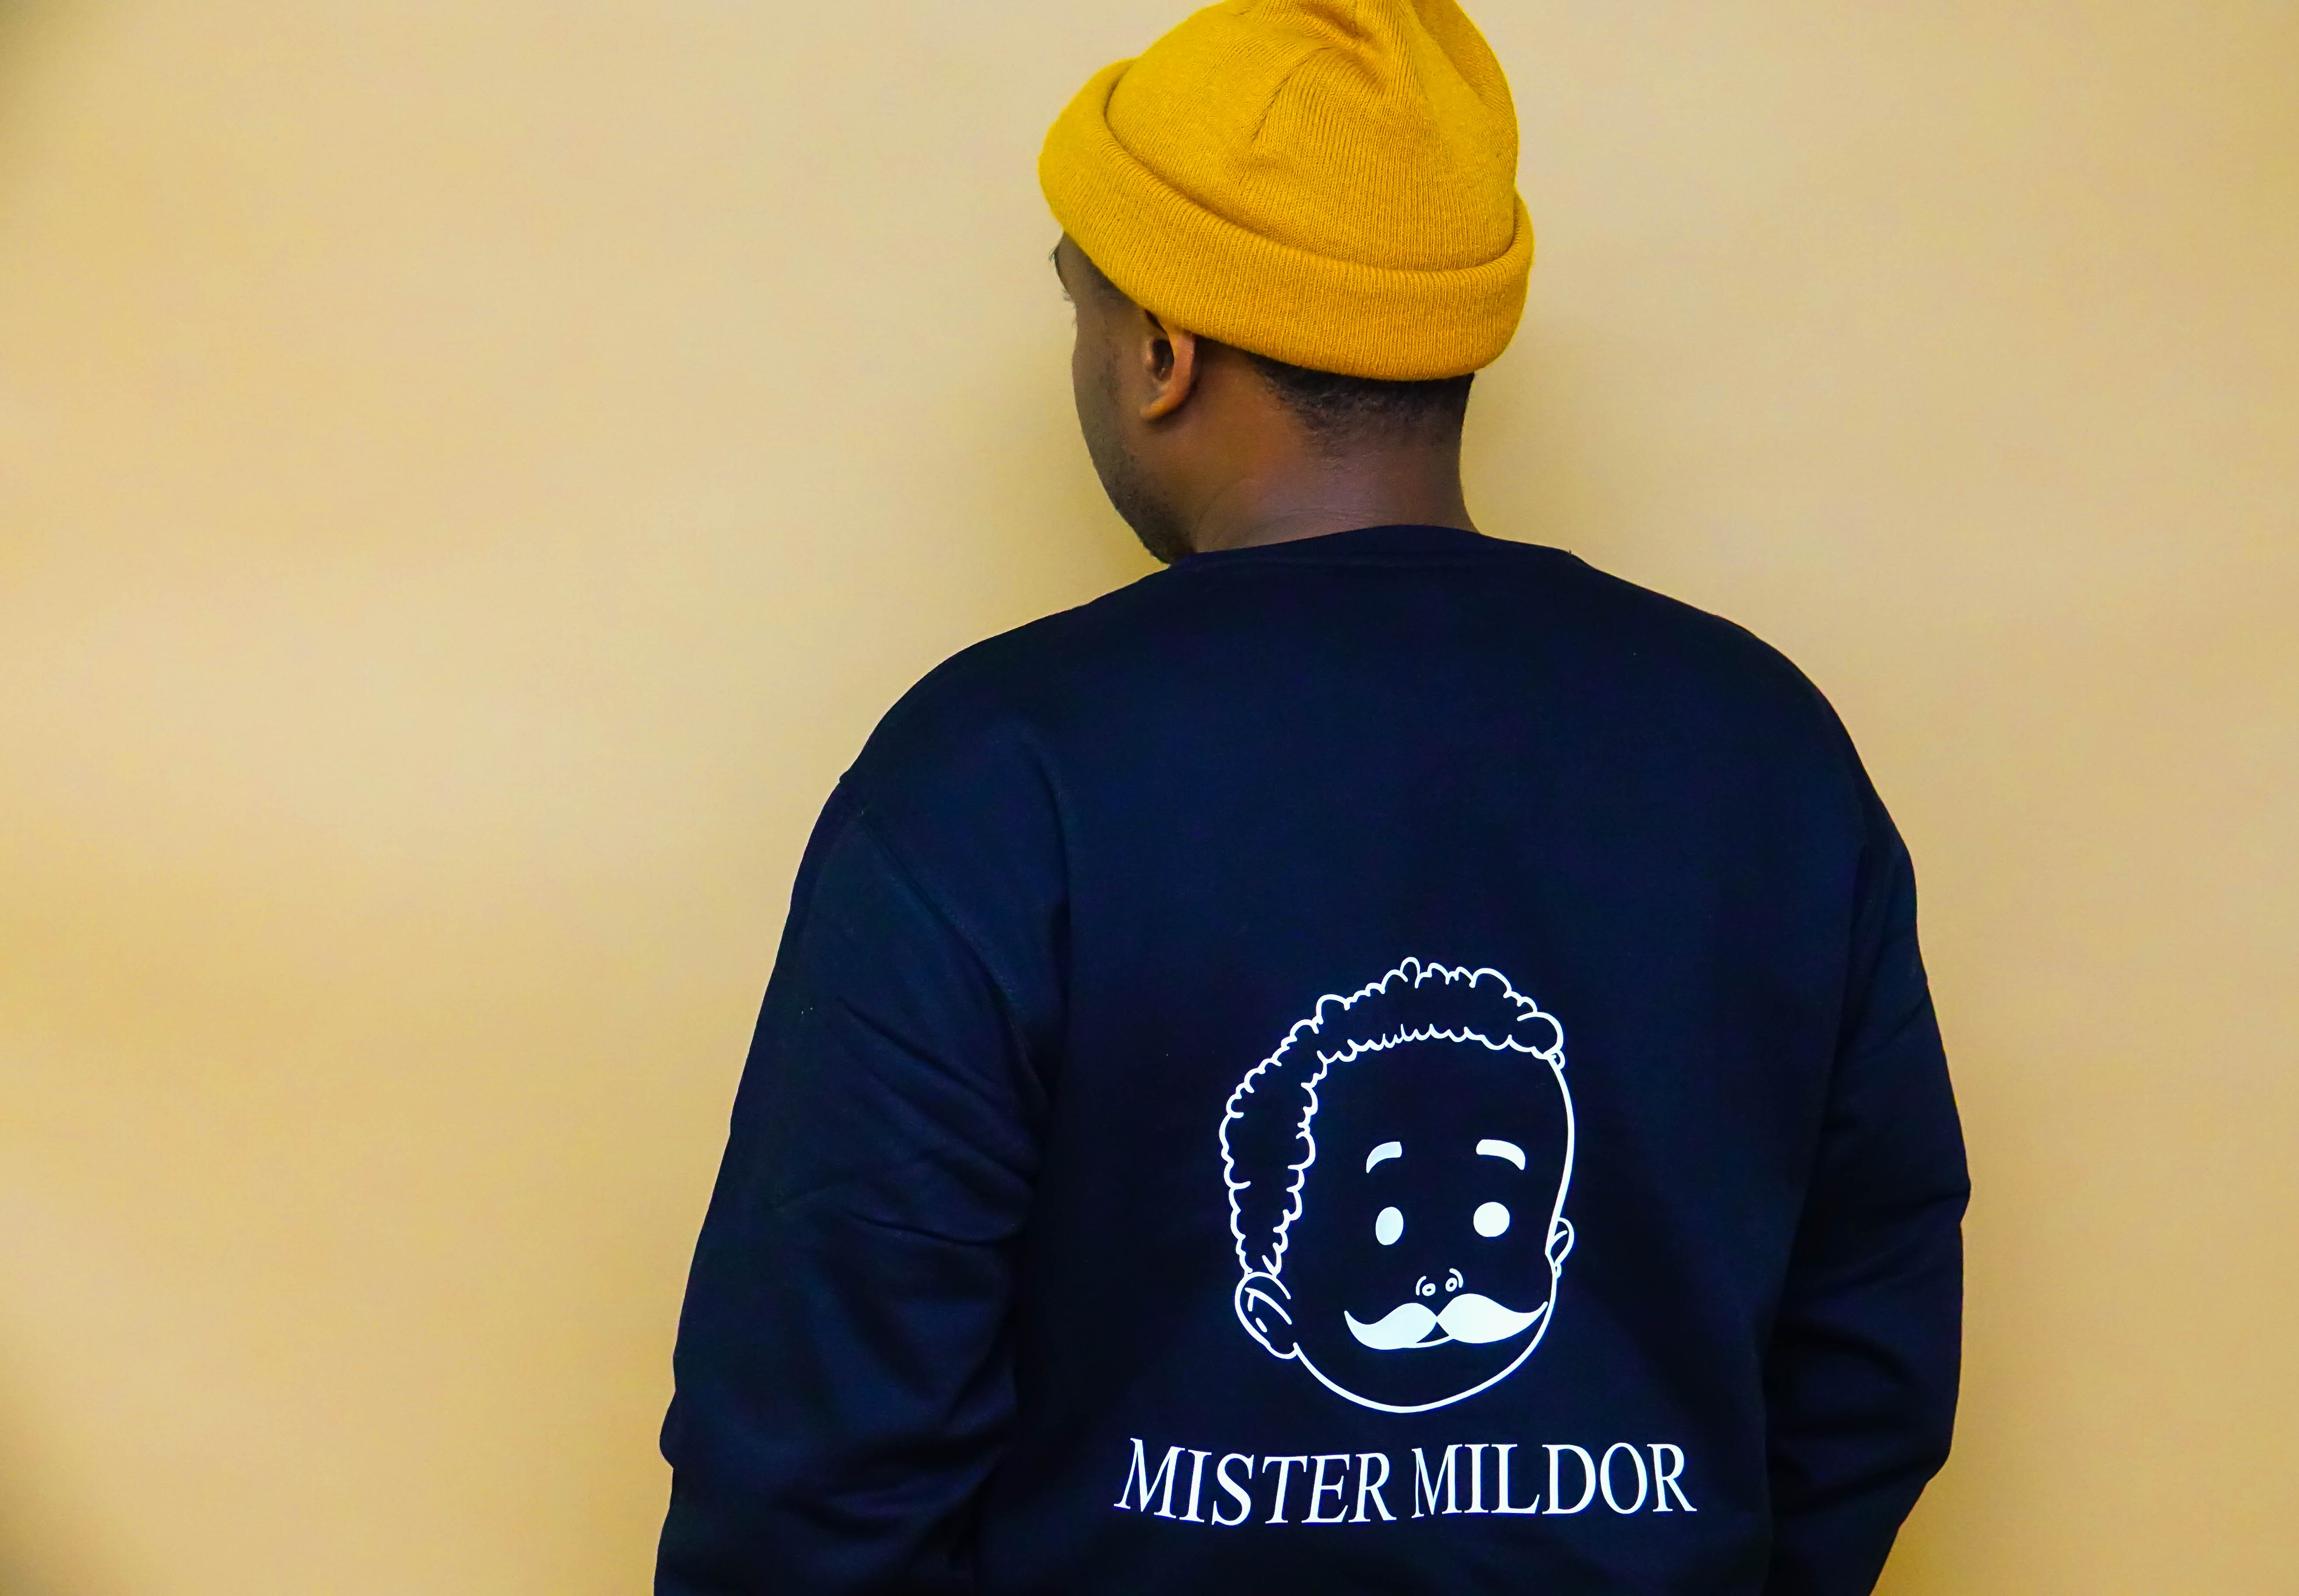 Who is Mister Mildor?